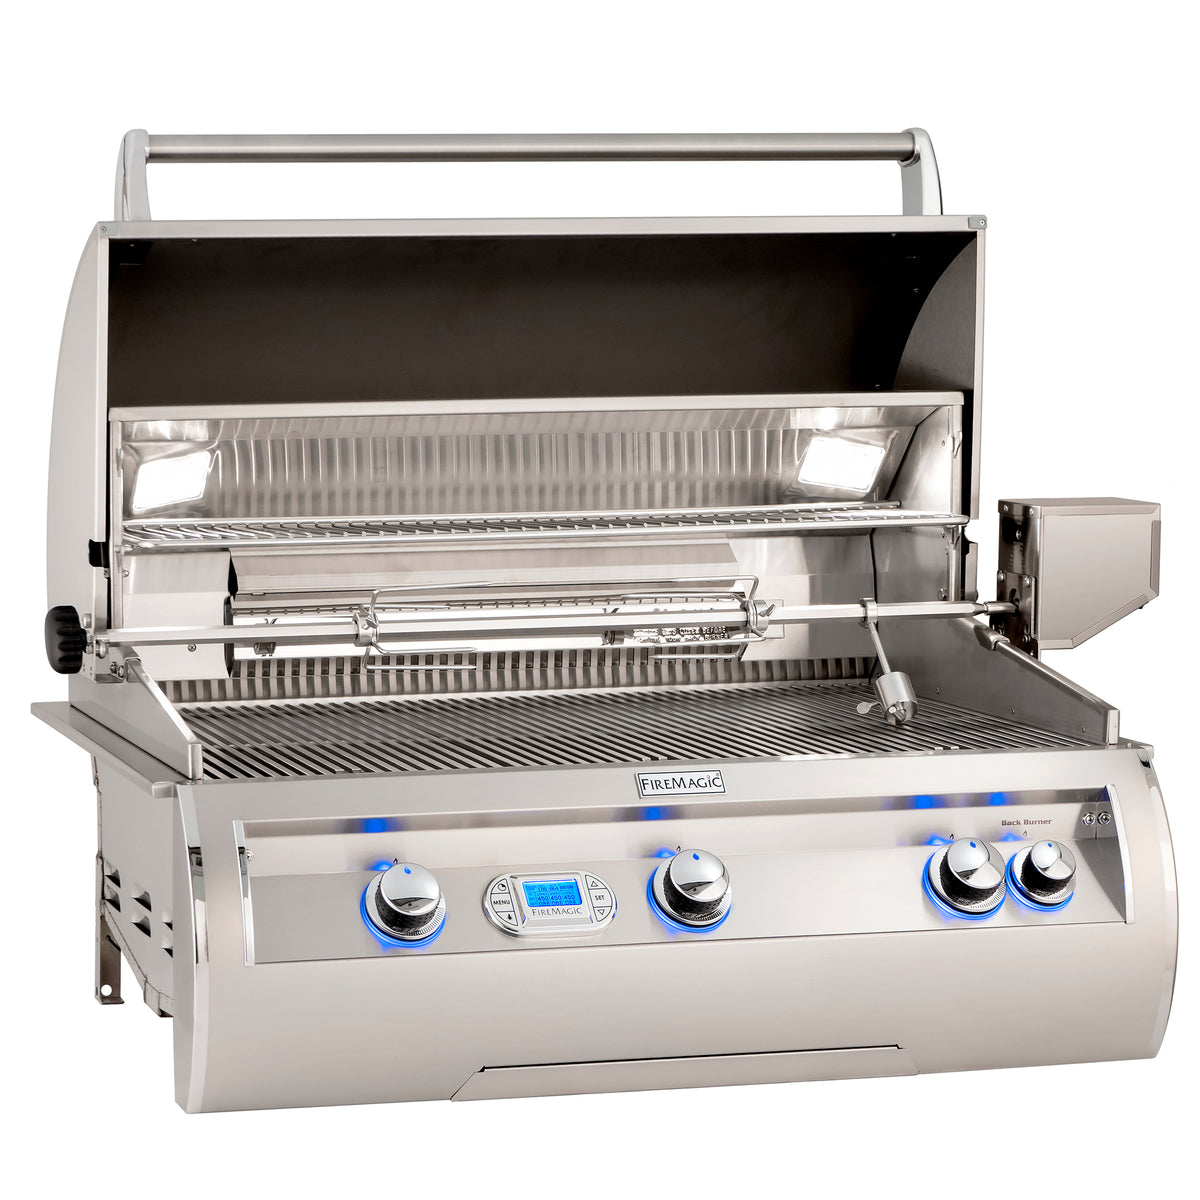 Fire Magic Echelon E790i Built-In Grill With Digital Thermometer